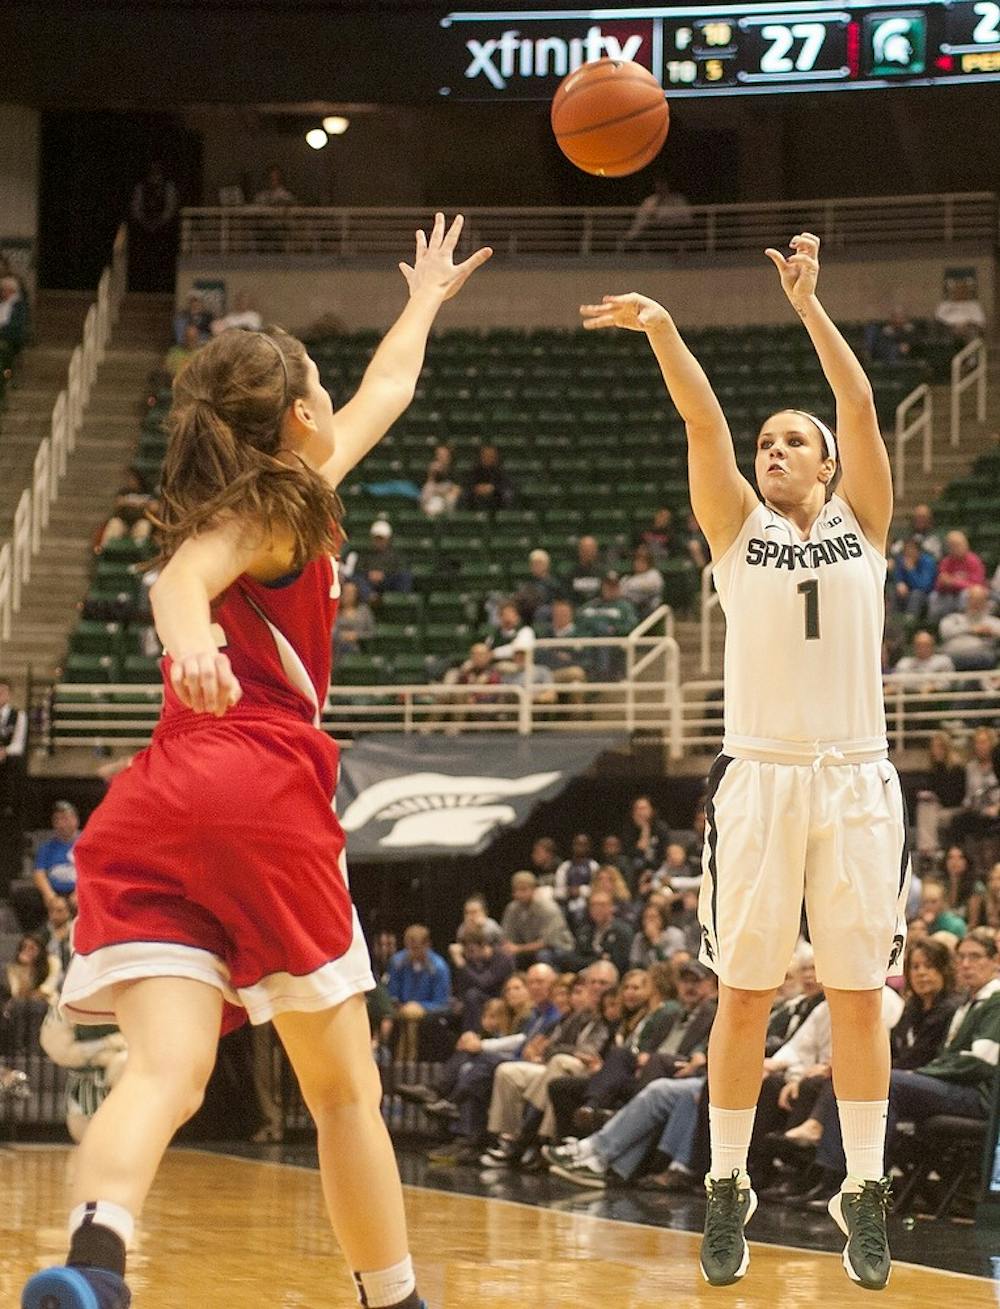 	<p>Freshman guard Tori Jankoska shoots a three-pointer during the game against Dayton on Nov. 17, 2013, at Breslin Center. Jankoska was one of the leading scorers with 24 points and helped the Spartans to an overtime victory, 96-89. Micaela Colonna/ The State News</p>